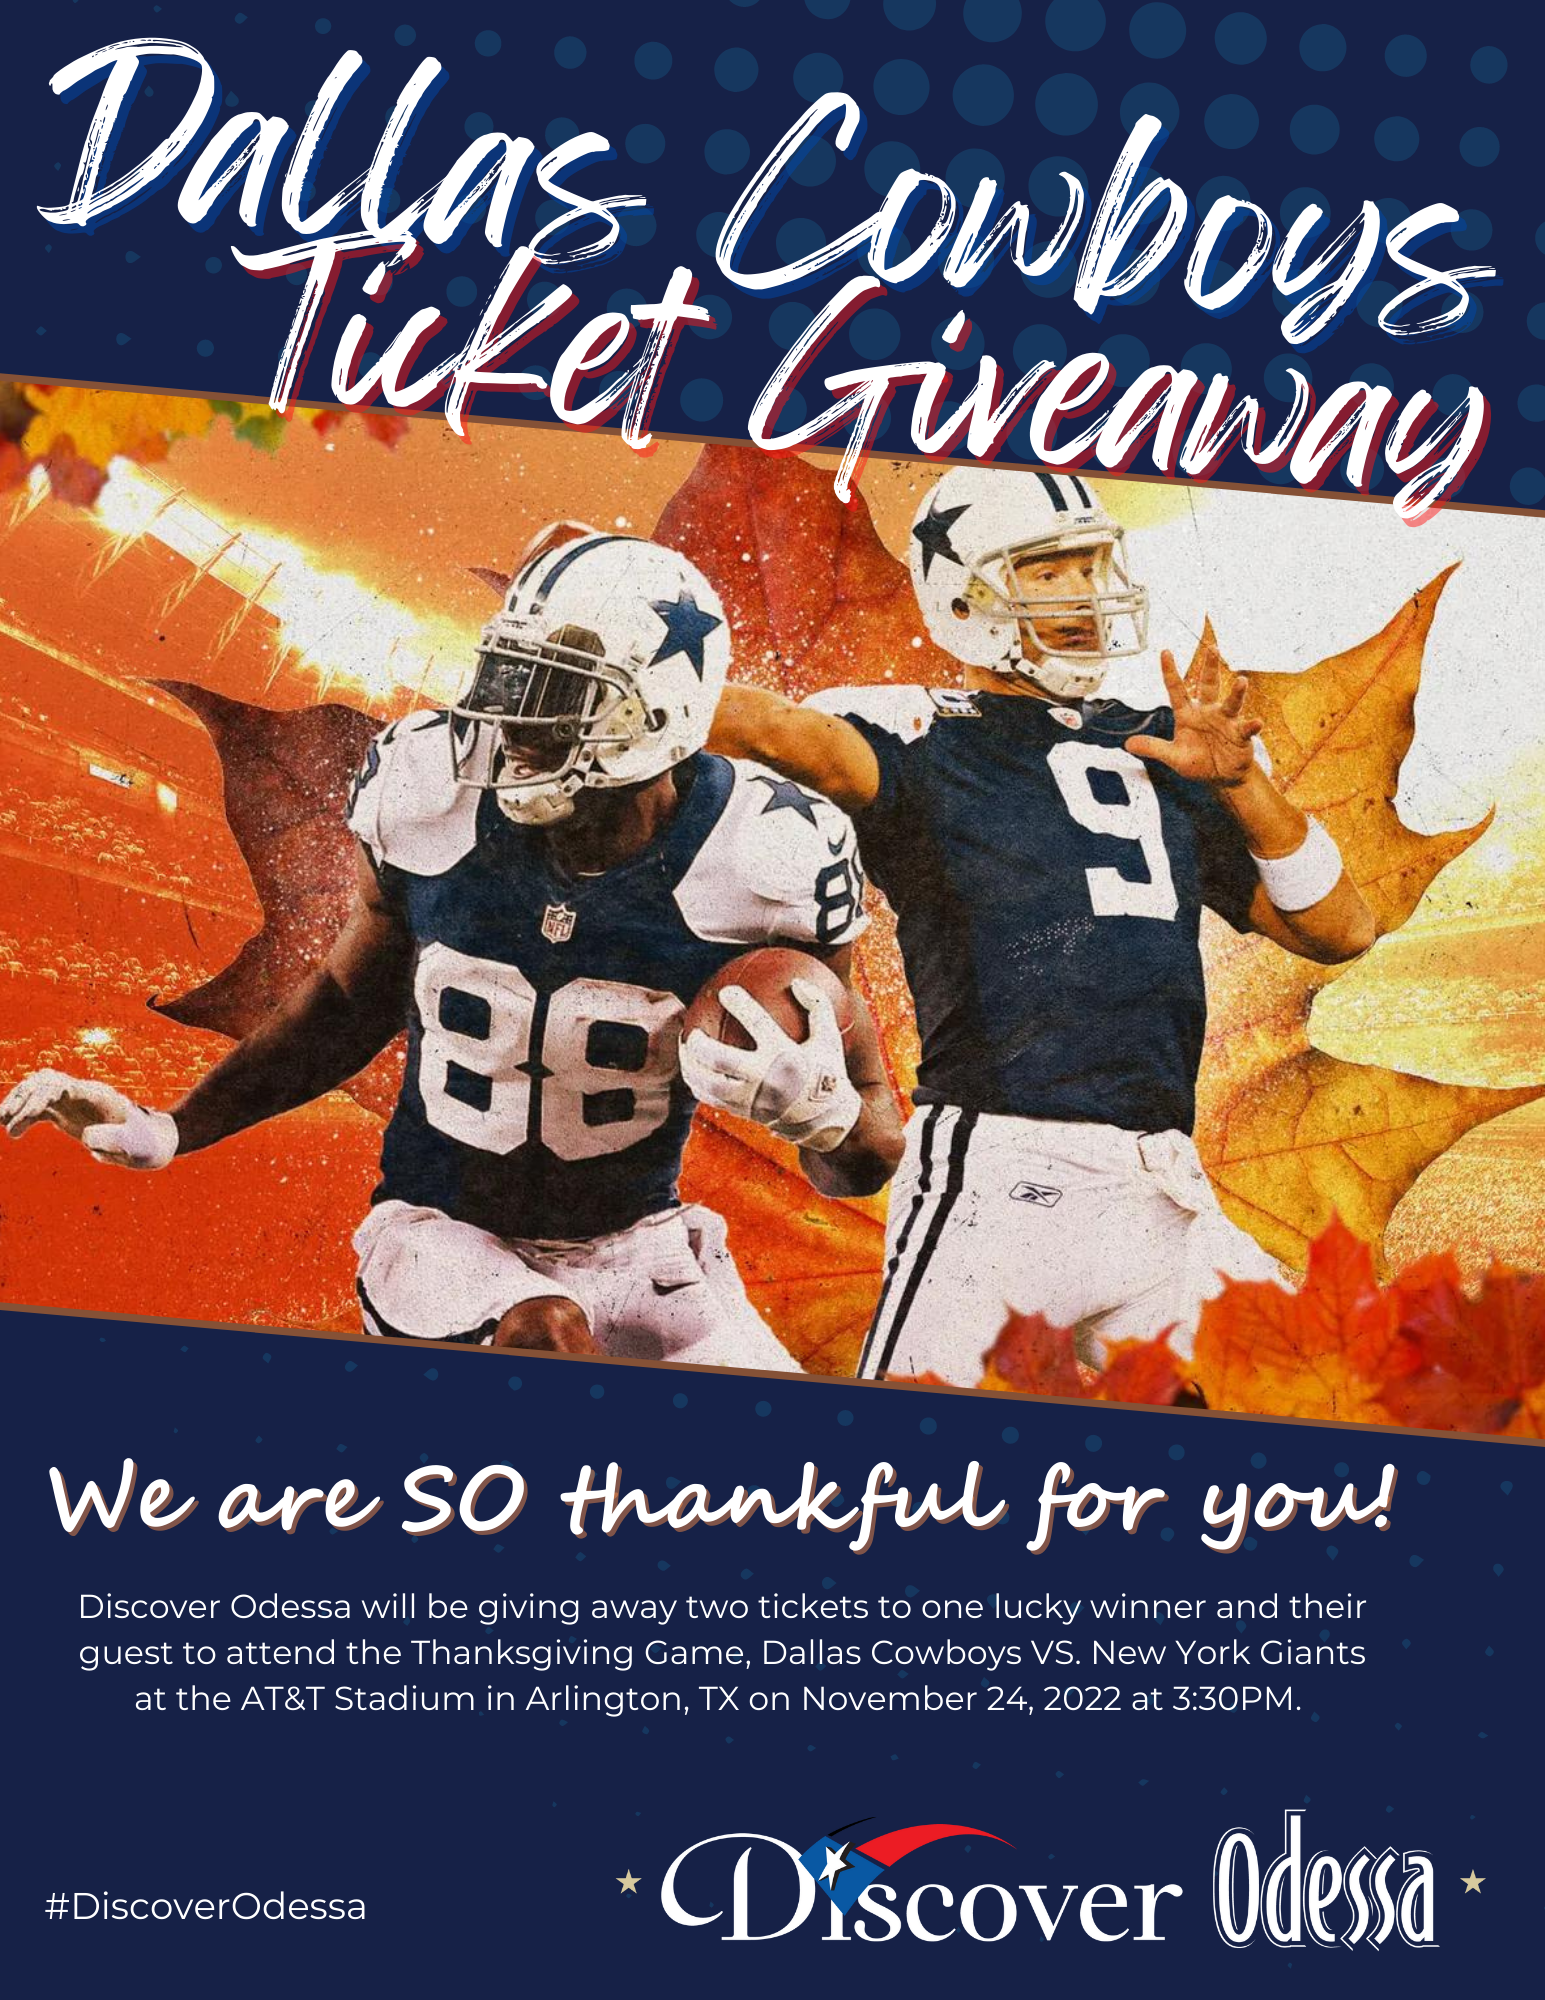 cowboys game thanksgiving tickets